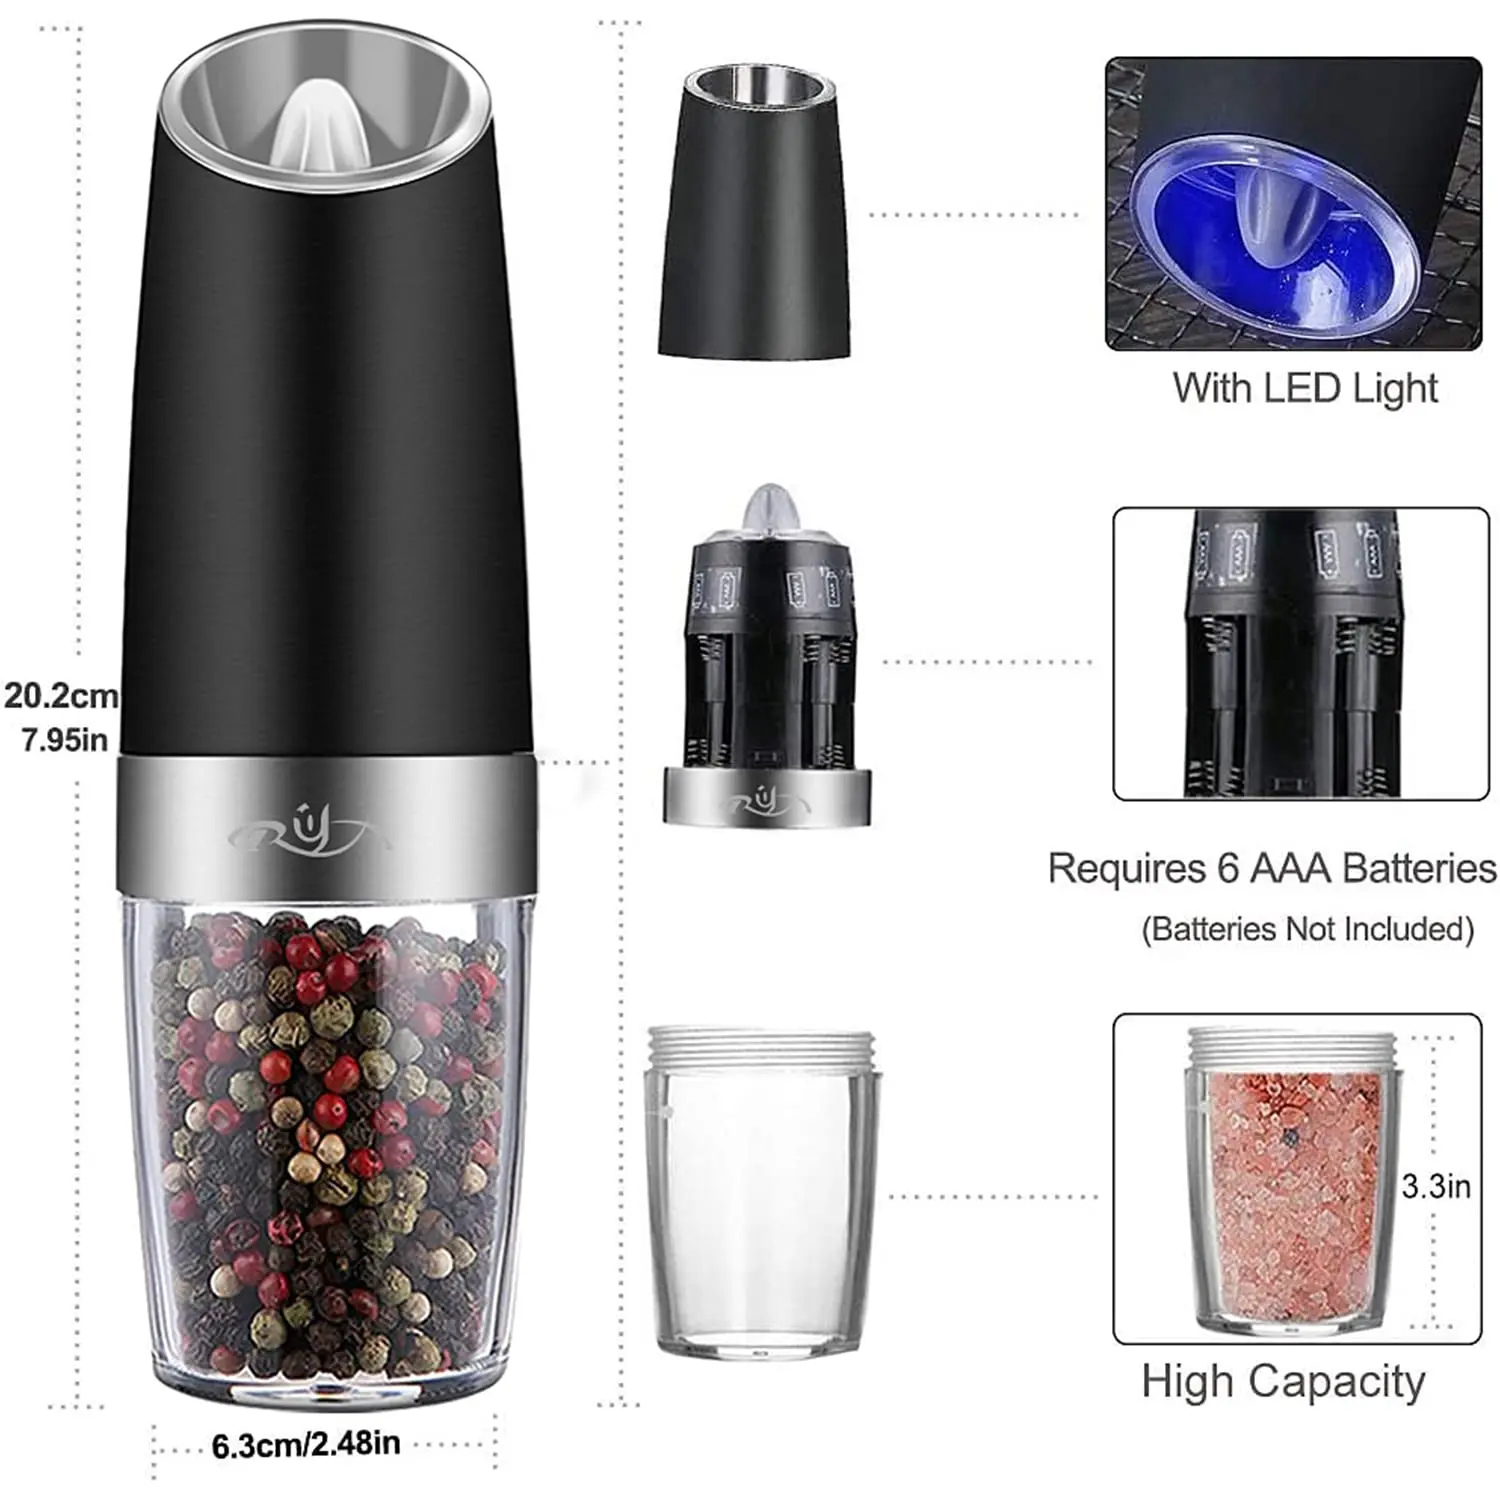 https://ae01.alicdn.com/kf/Sd2539bcbbe314865b36af35993abfda31/Buyyes-Set-Electric-Pepper-Mill-Stainless-Steel-Automatic-Gravity-Induction-Salt-and-Pepper-Grinder-Kitchen-Spice.jpg